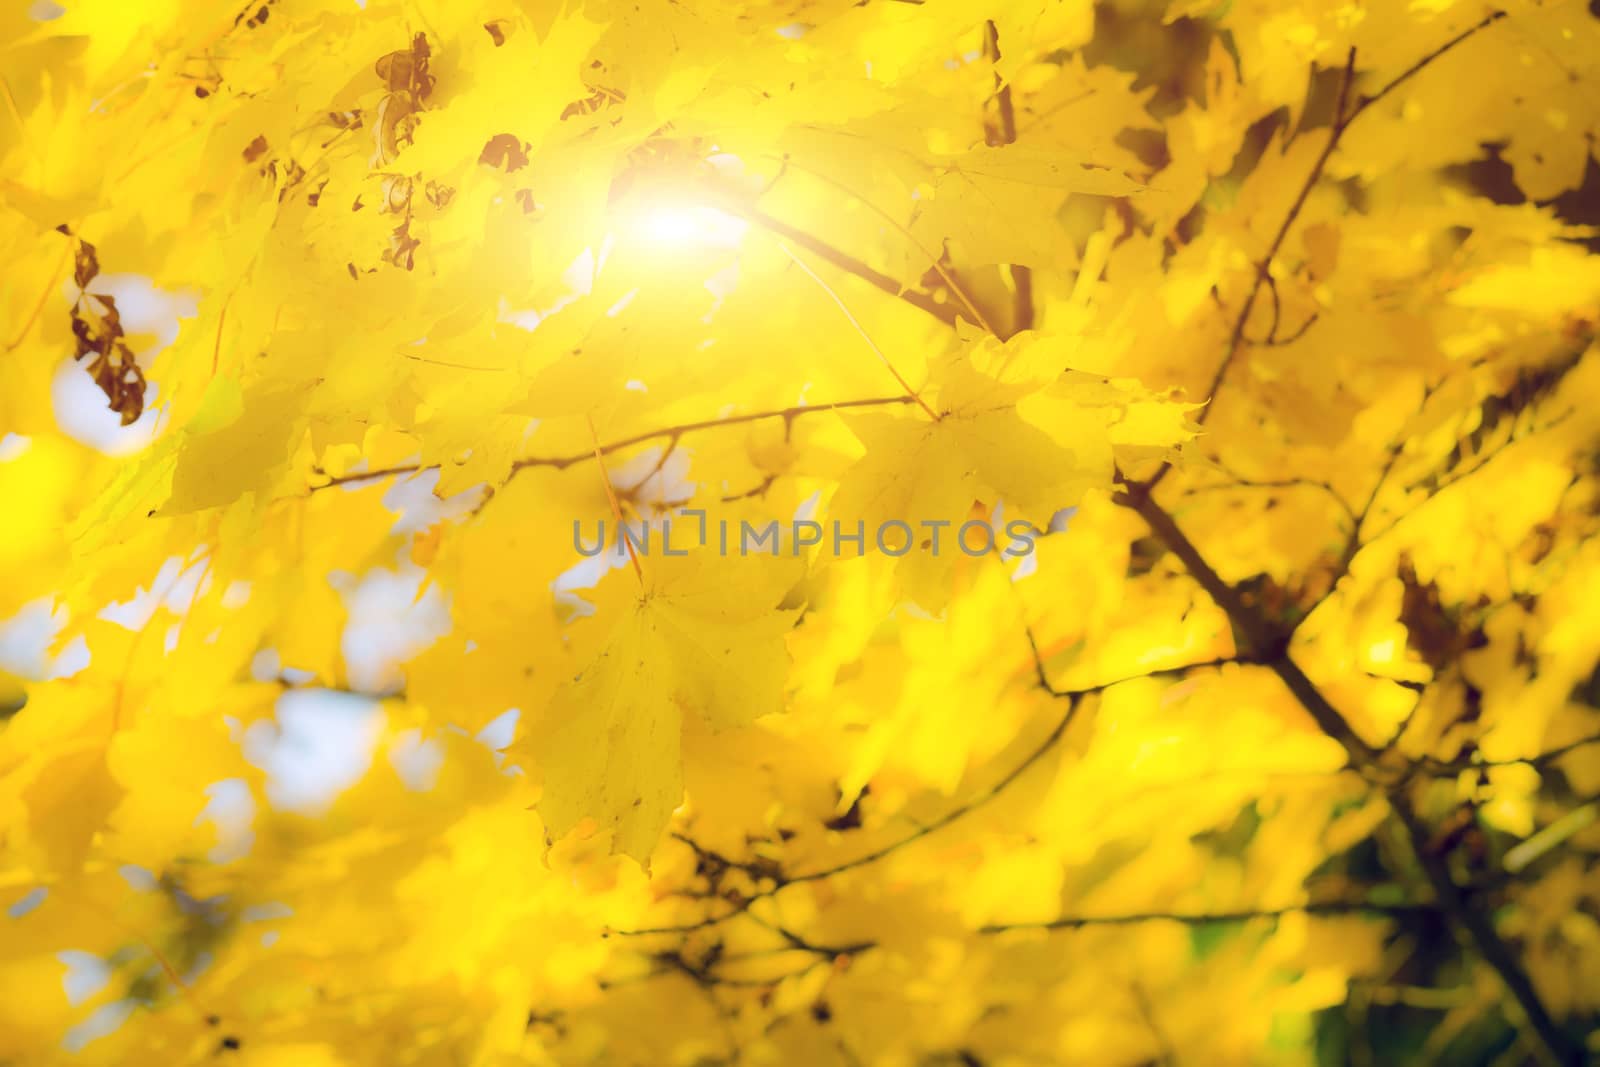 Golden autumn leaves by Fr@nk